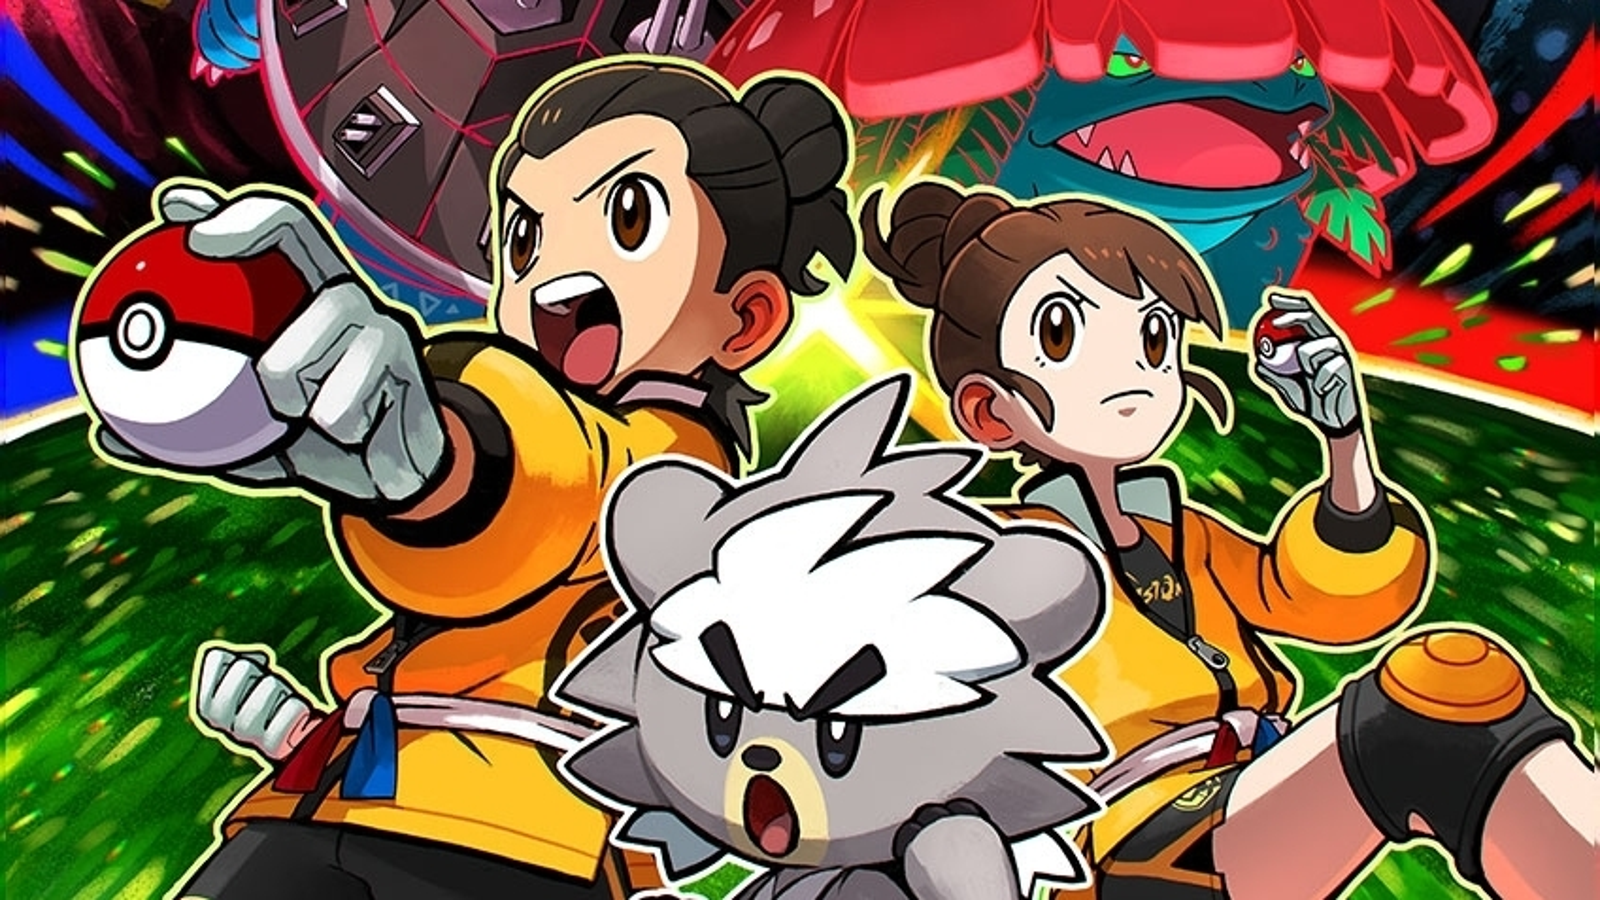 Pokemon Sword and Shield Isle of Armor guide: Everything you need